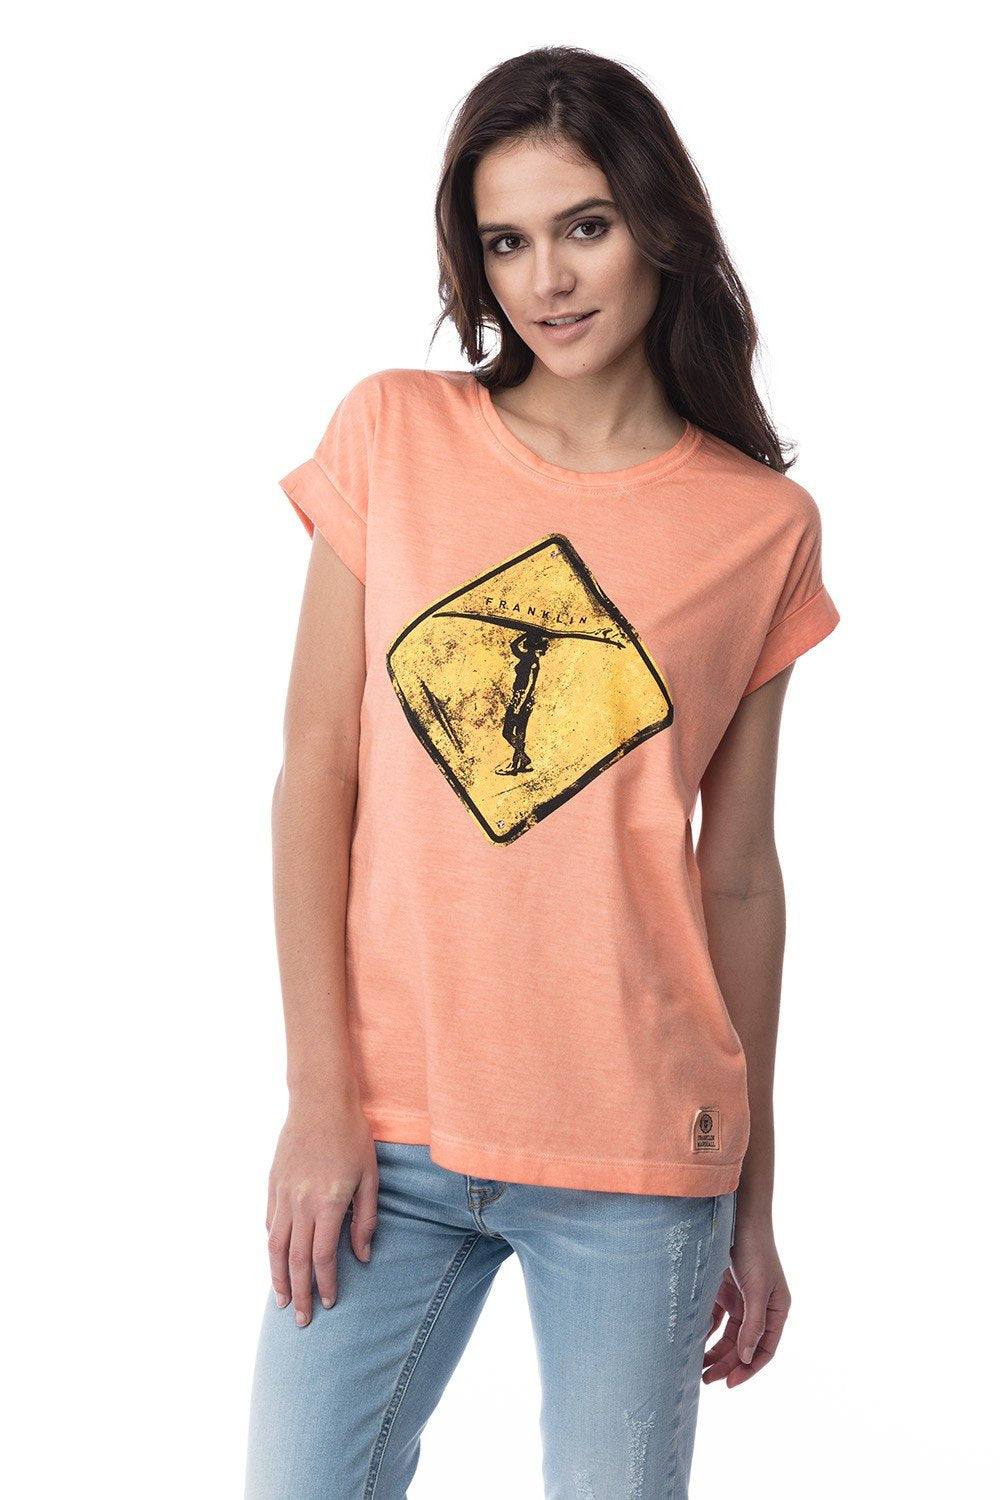 Franklin and Marshall T-SHIRT STAMPA SURF, BOYFRIEND TEE FIT, colore TANGERINE